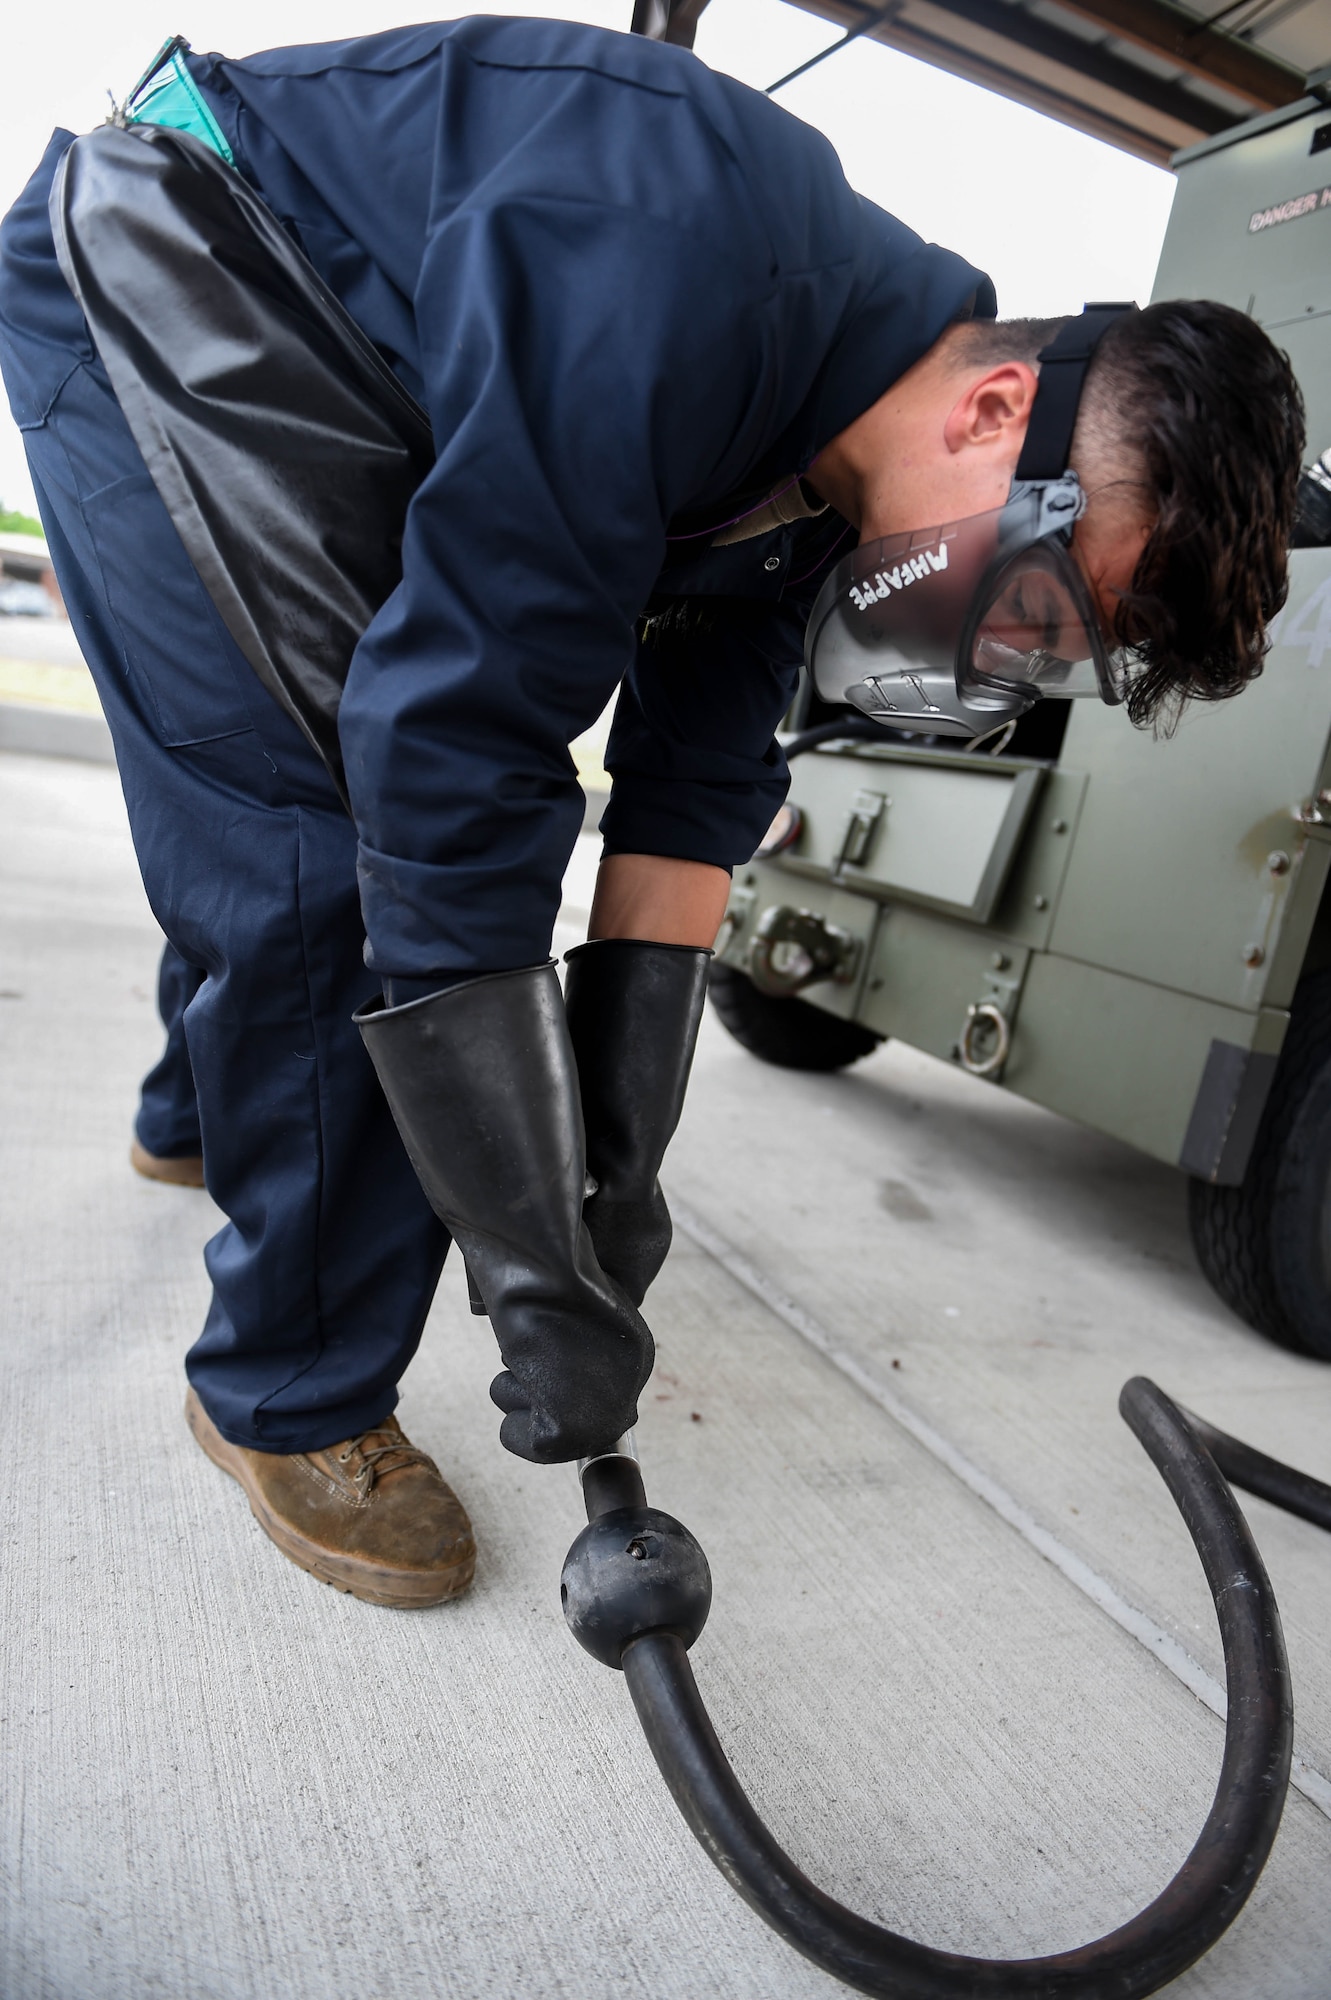 Senior Airman Patrick Christoffersen, 62nd Maintenance Squadron aerospace ground equipment (AGE) journeyman, adjusts a fuel hose during the defueling of a flight line generator unit in the AGE shop at Joint Base Lewis-McChord, Wash., Aug. 3, 2020. Before being loaded onto a C-17 Globemaster III, fuel is drained from cargo to prevent any leakage on the aircraft. (U.S. Air Force photo by Airman 1st Class Mikayla Heineck)